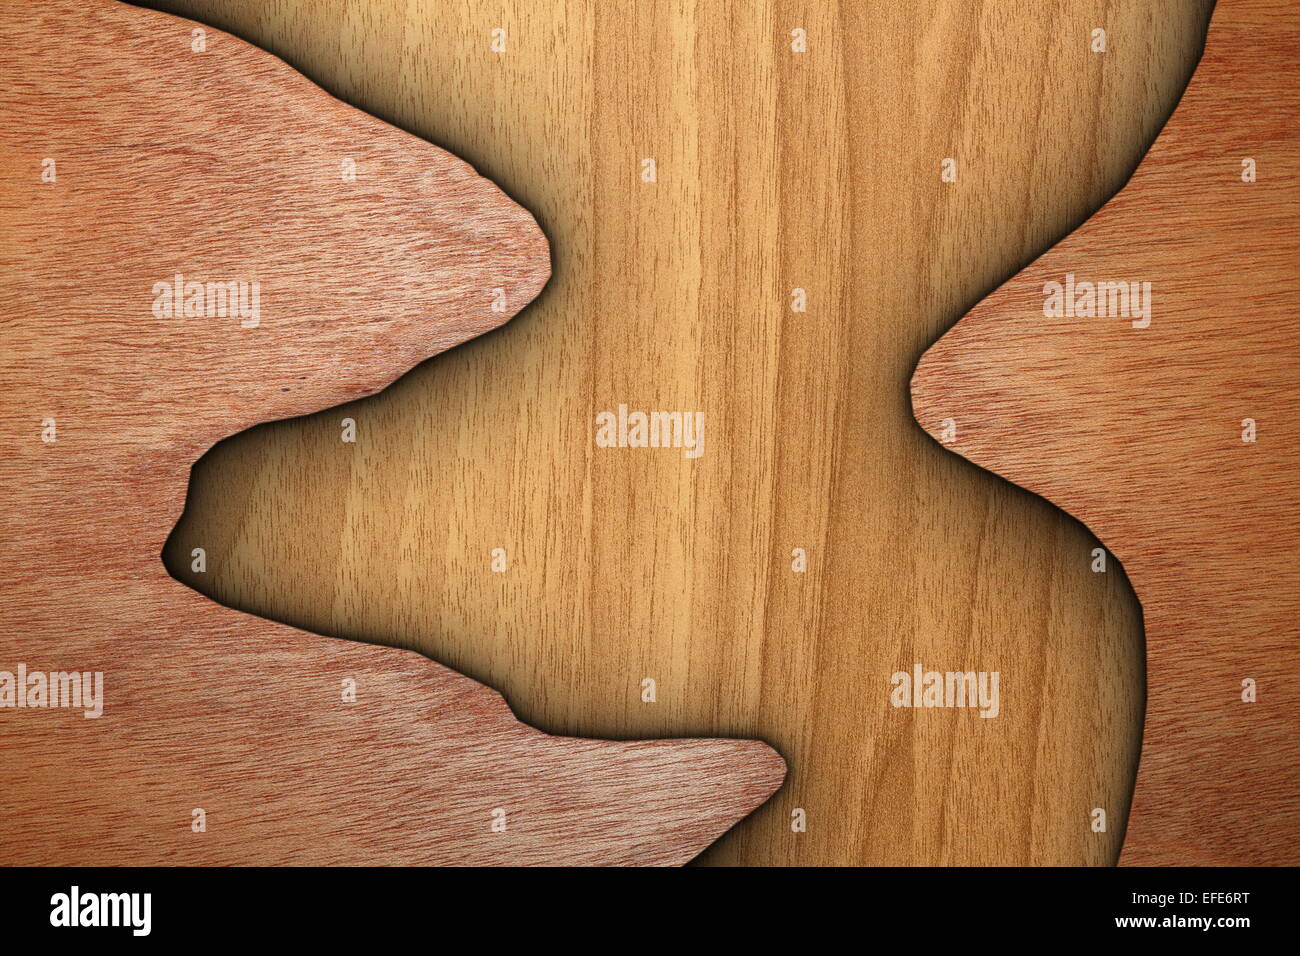 beautiful organic textures of wood combined in single image Stock Photo